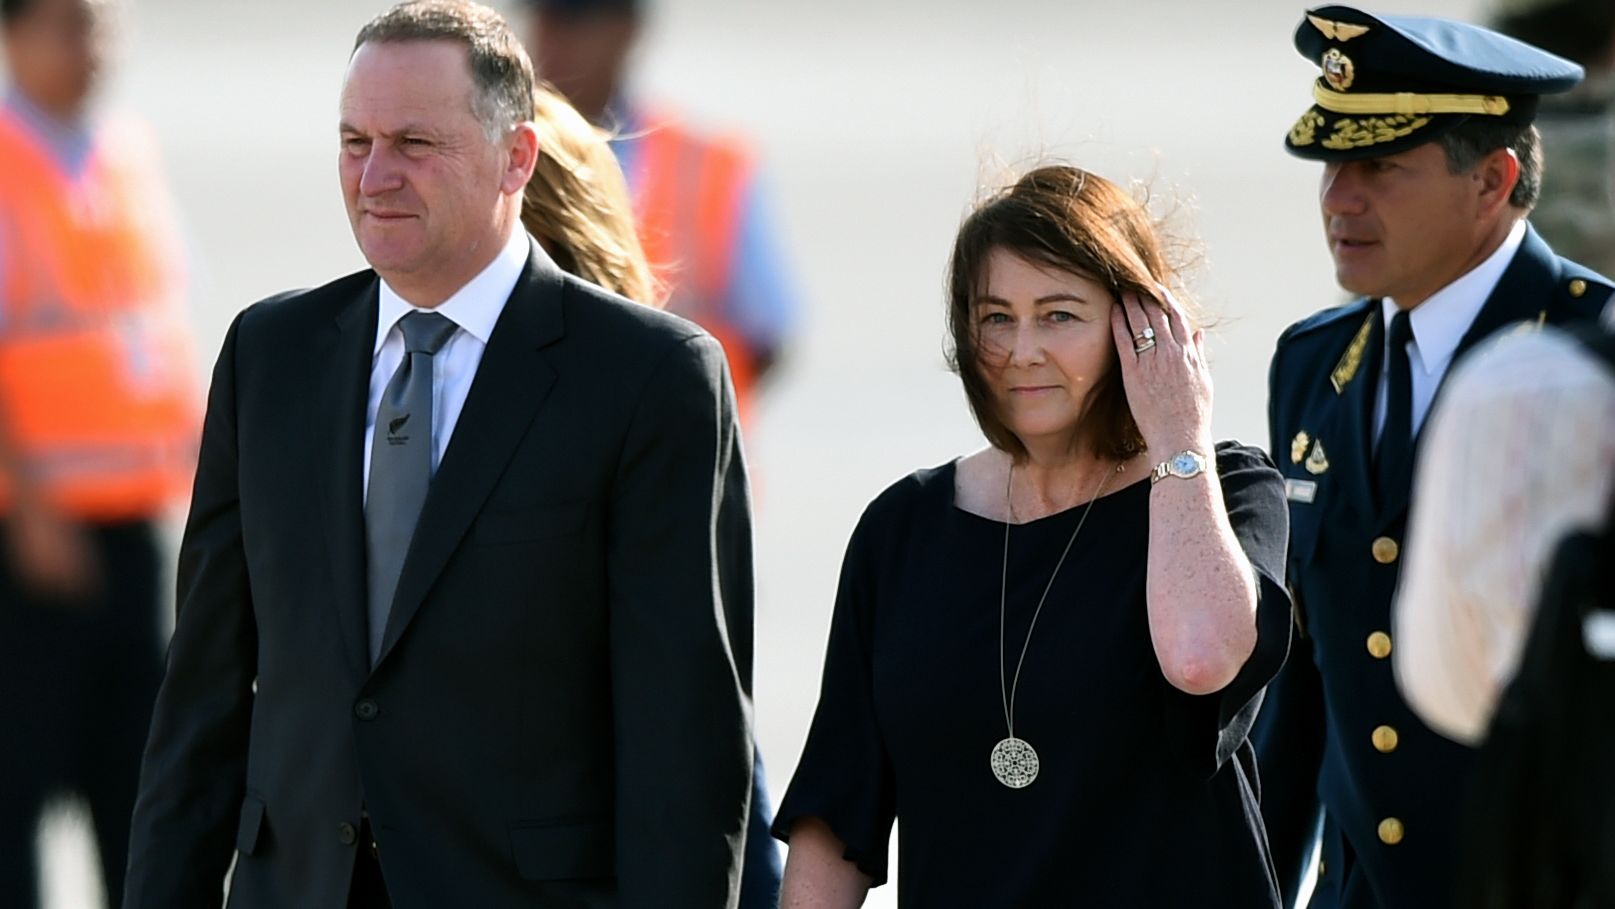 New Zealand's Prime Minister John Key and his wife Bronagh arrive for APEC talks in Lima, November 18, 2016.